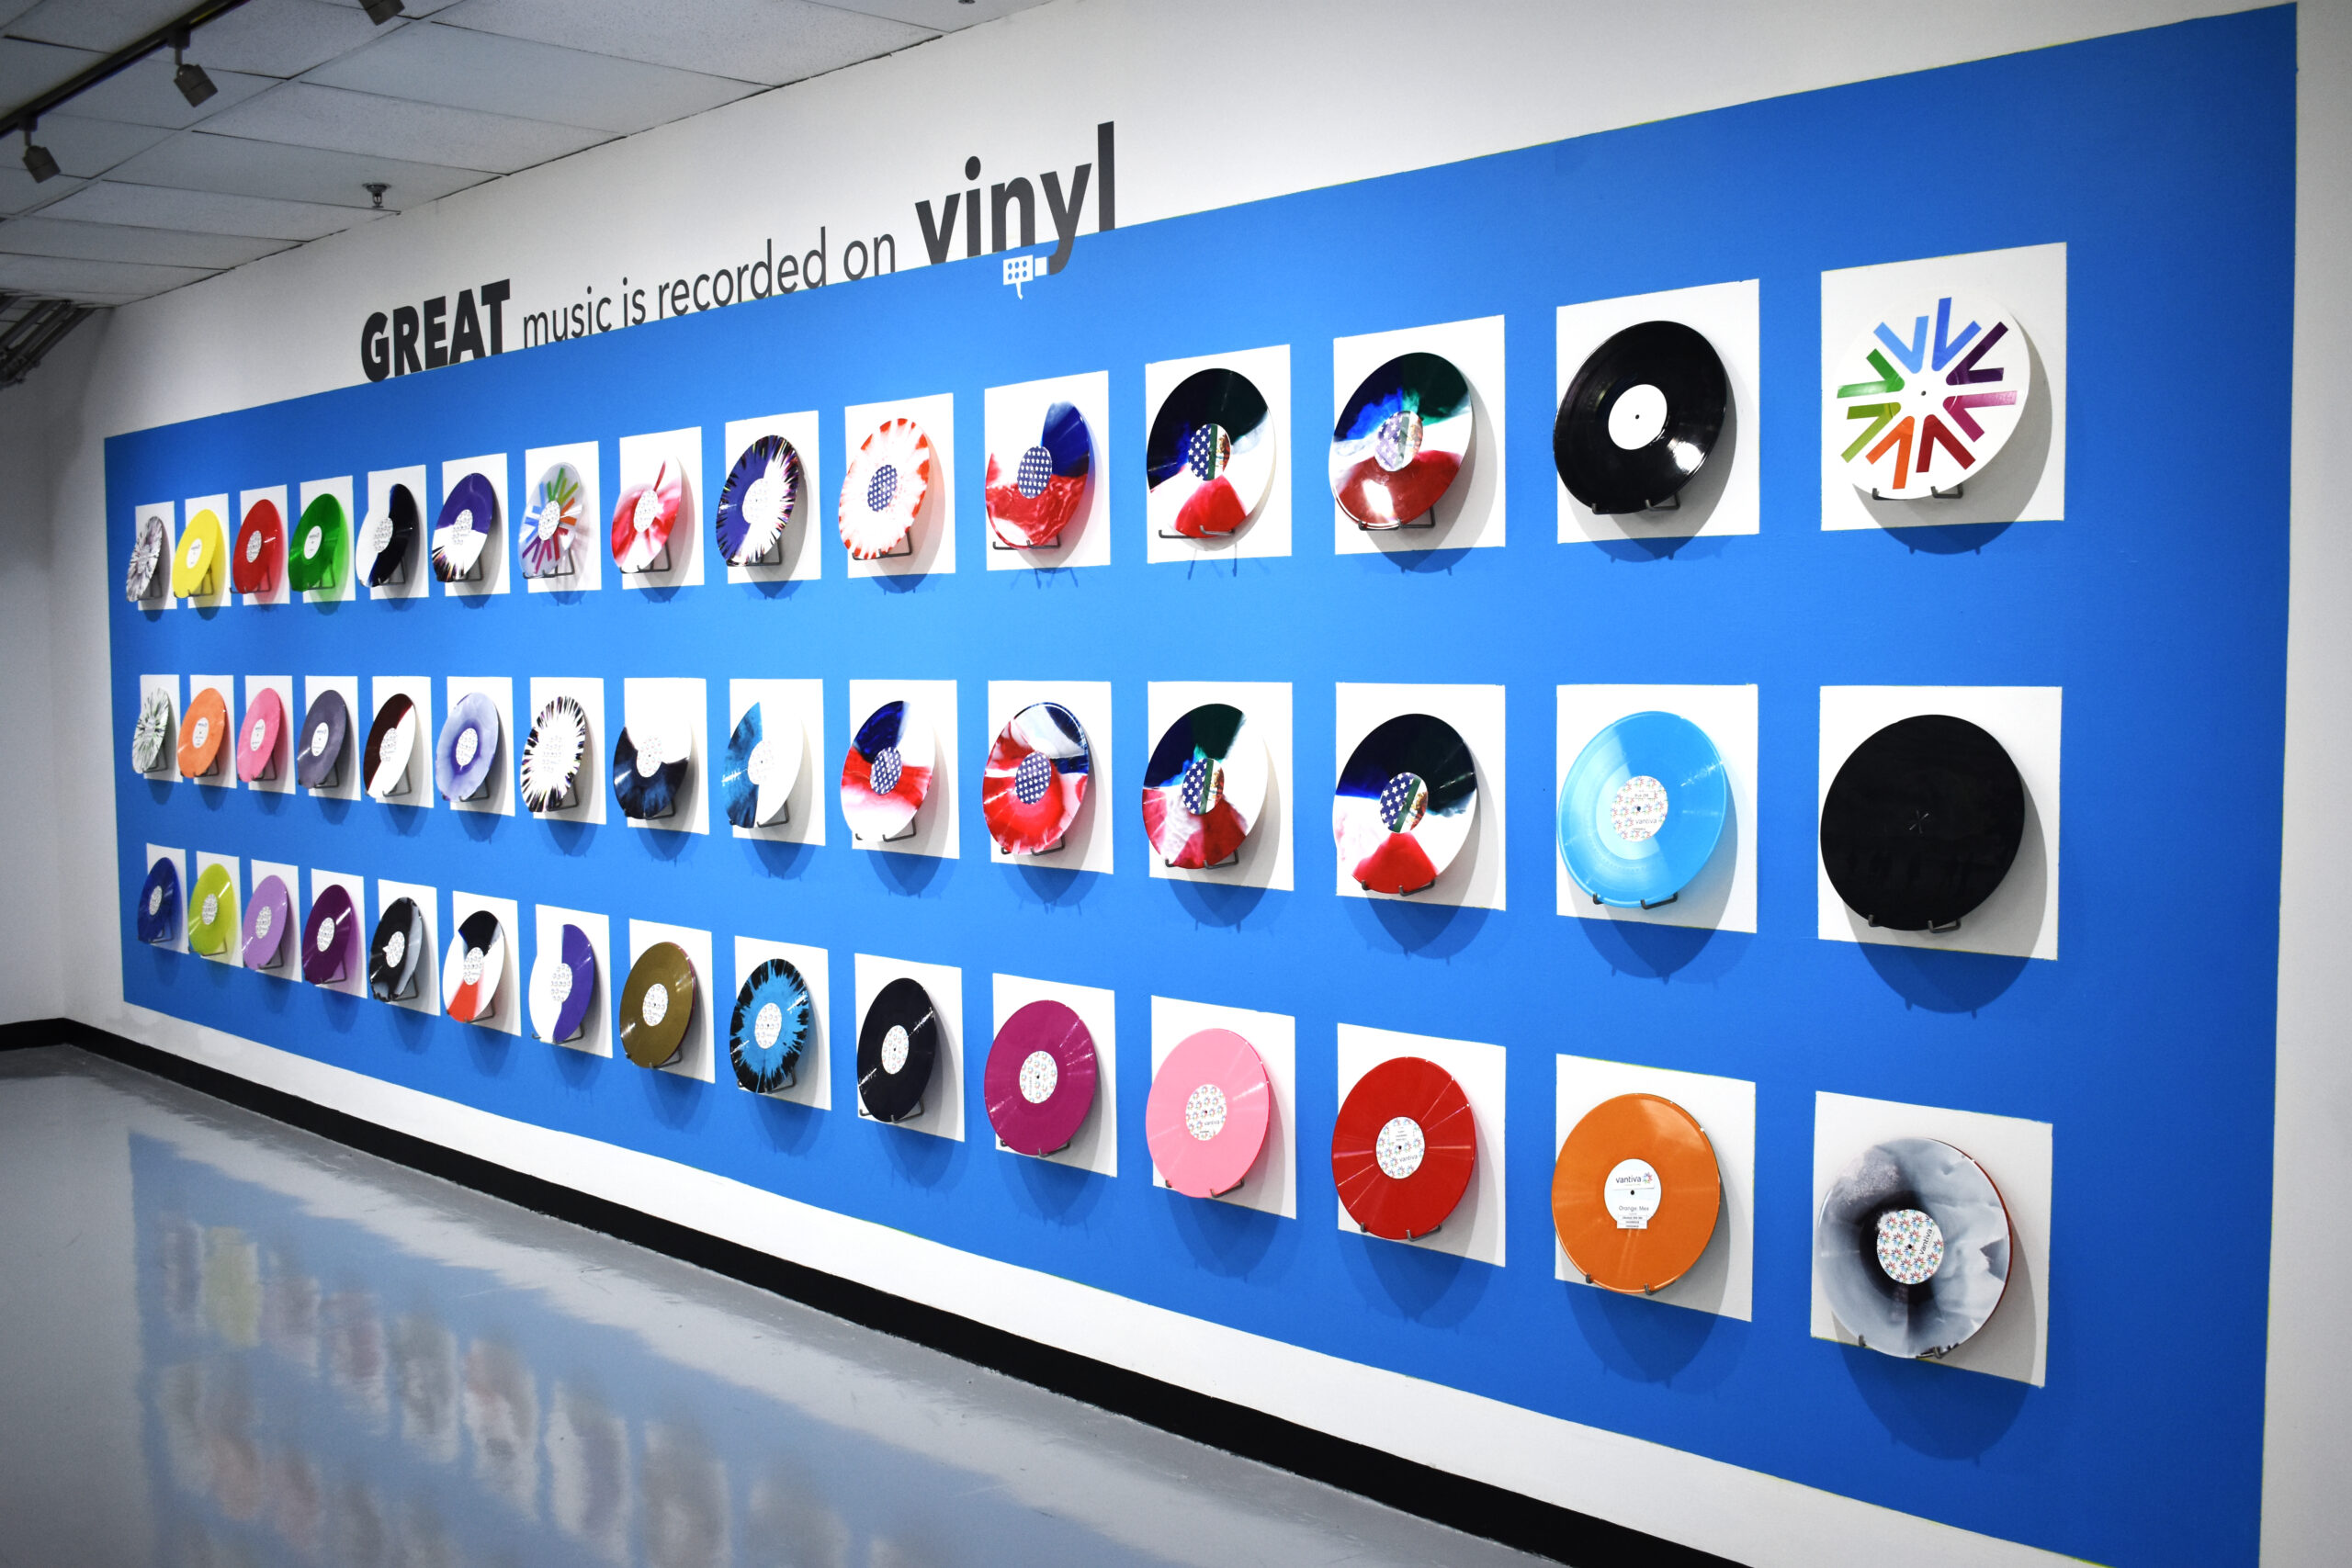 A wall of colorful vinyl records